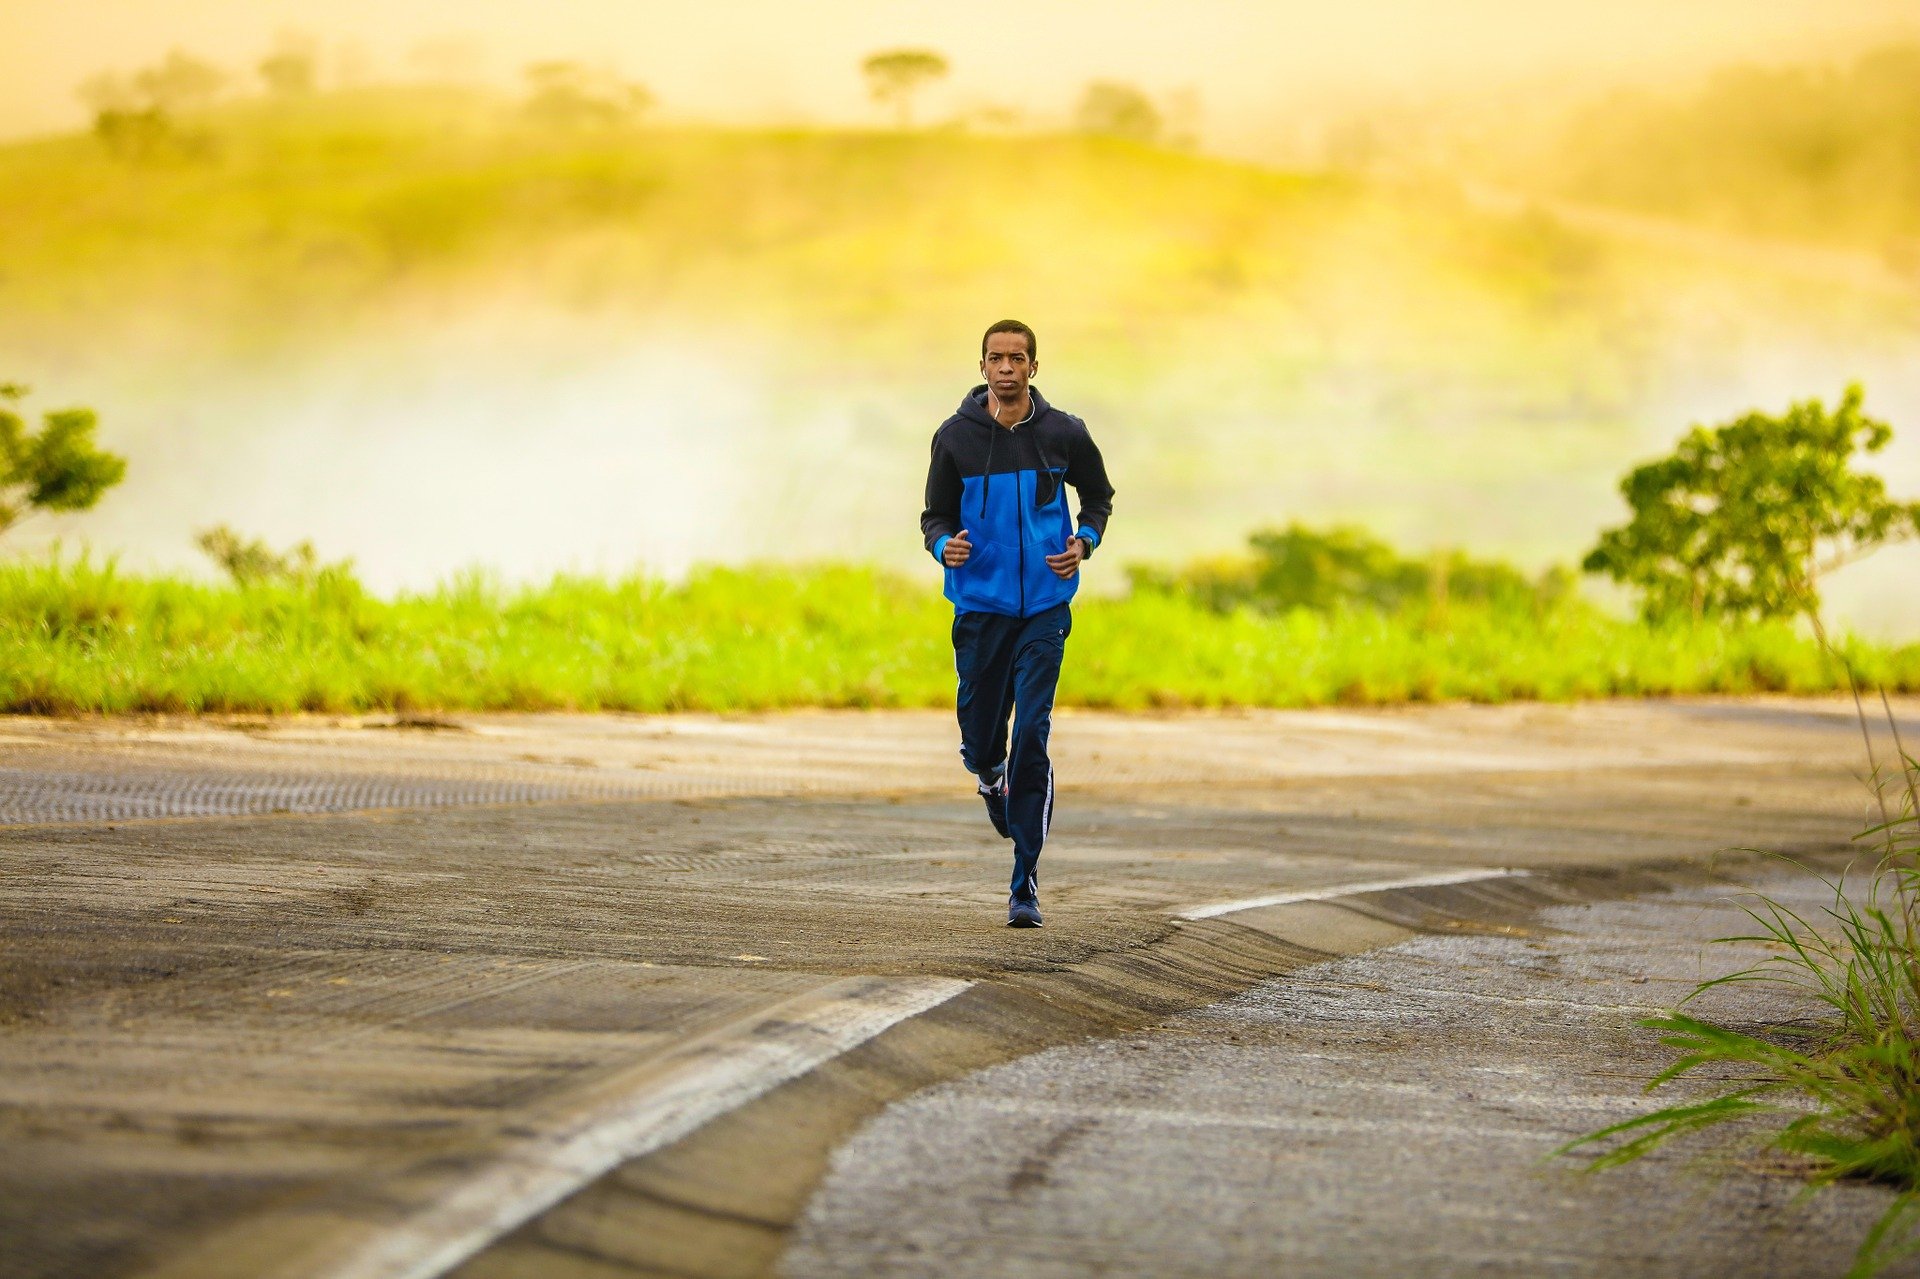 Should you run with or without glasses?